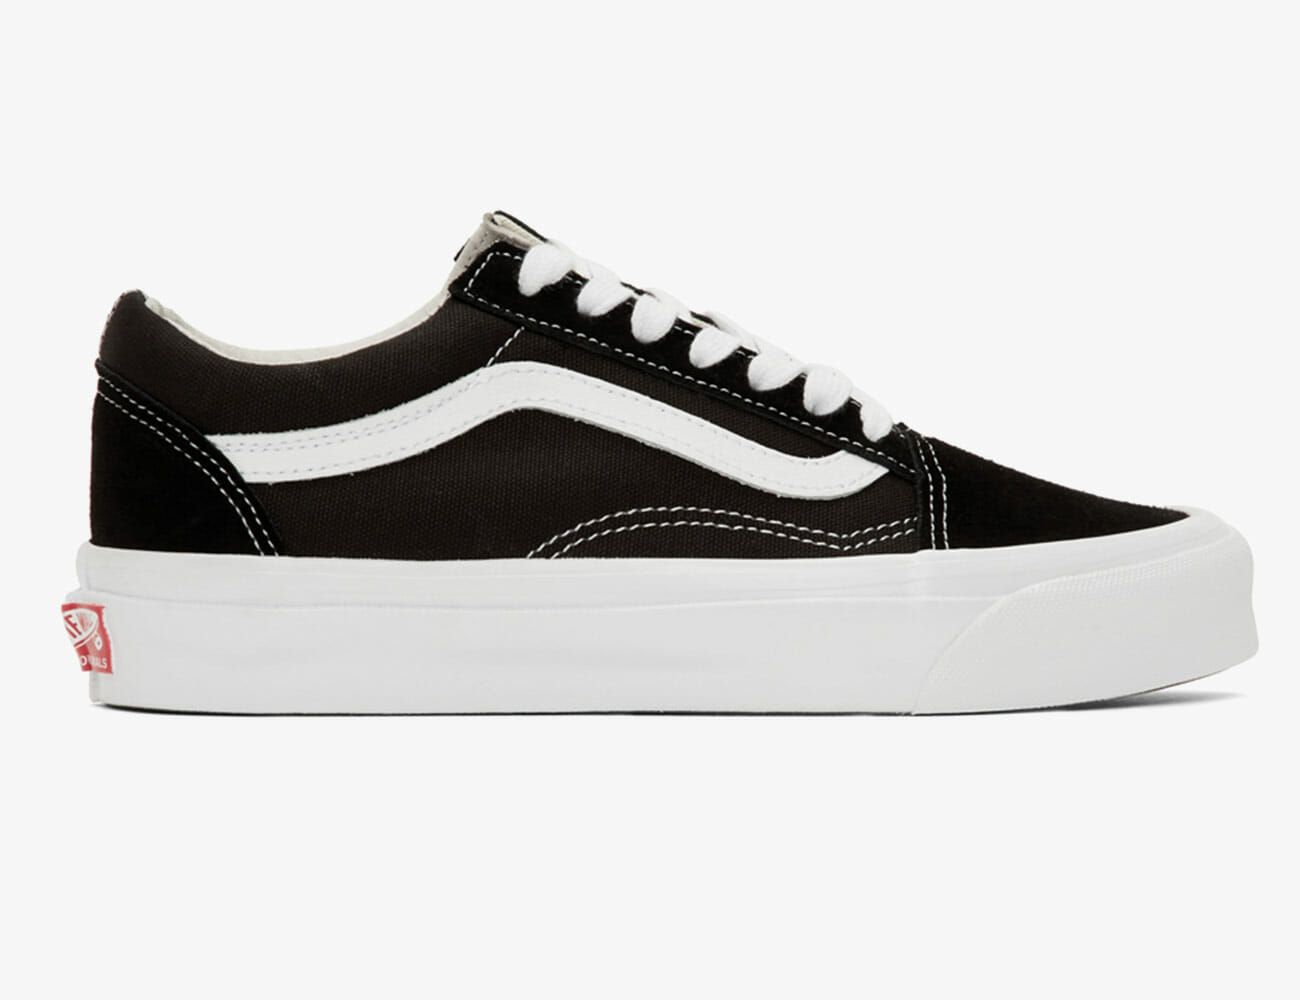 difference between vans old skool and pro